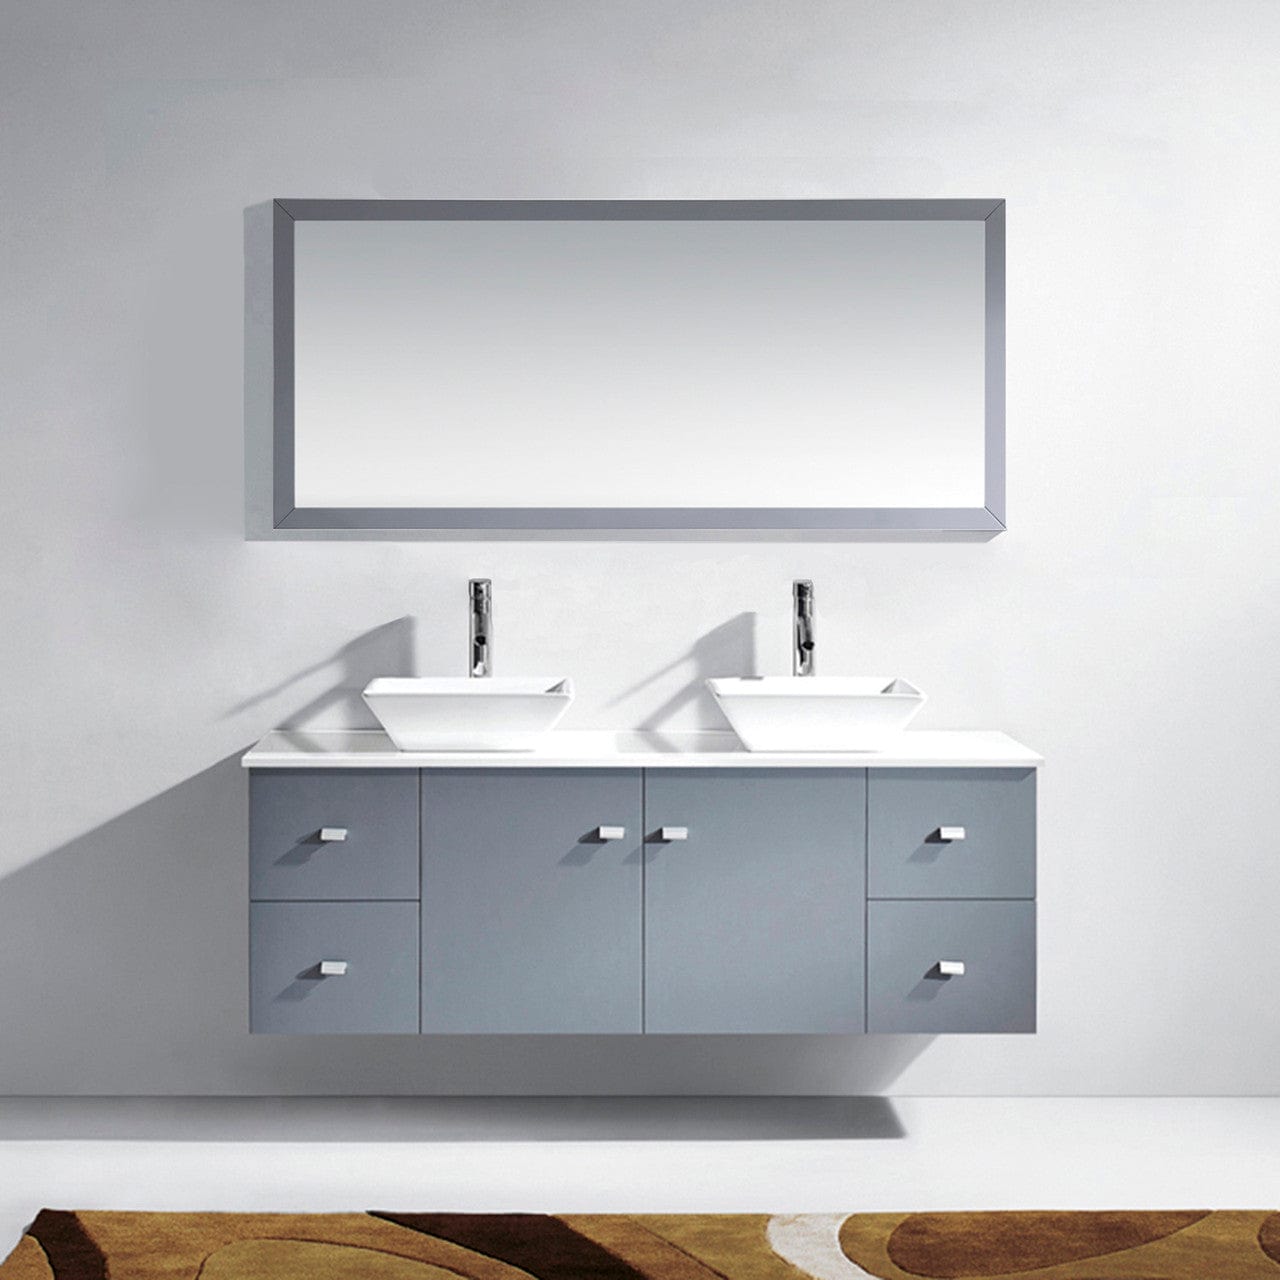 Virtu USA Clarissa 61 Double Bathroom Vanity Set in Grey w/ White Stone Counter-Top | Square Basin front view close up